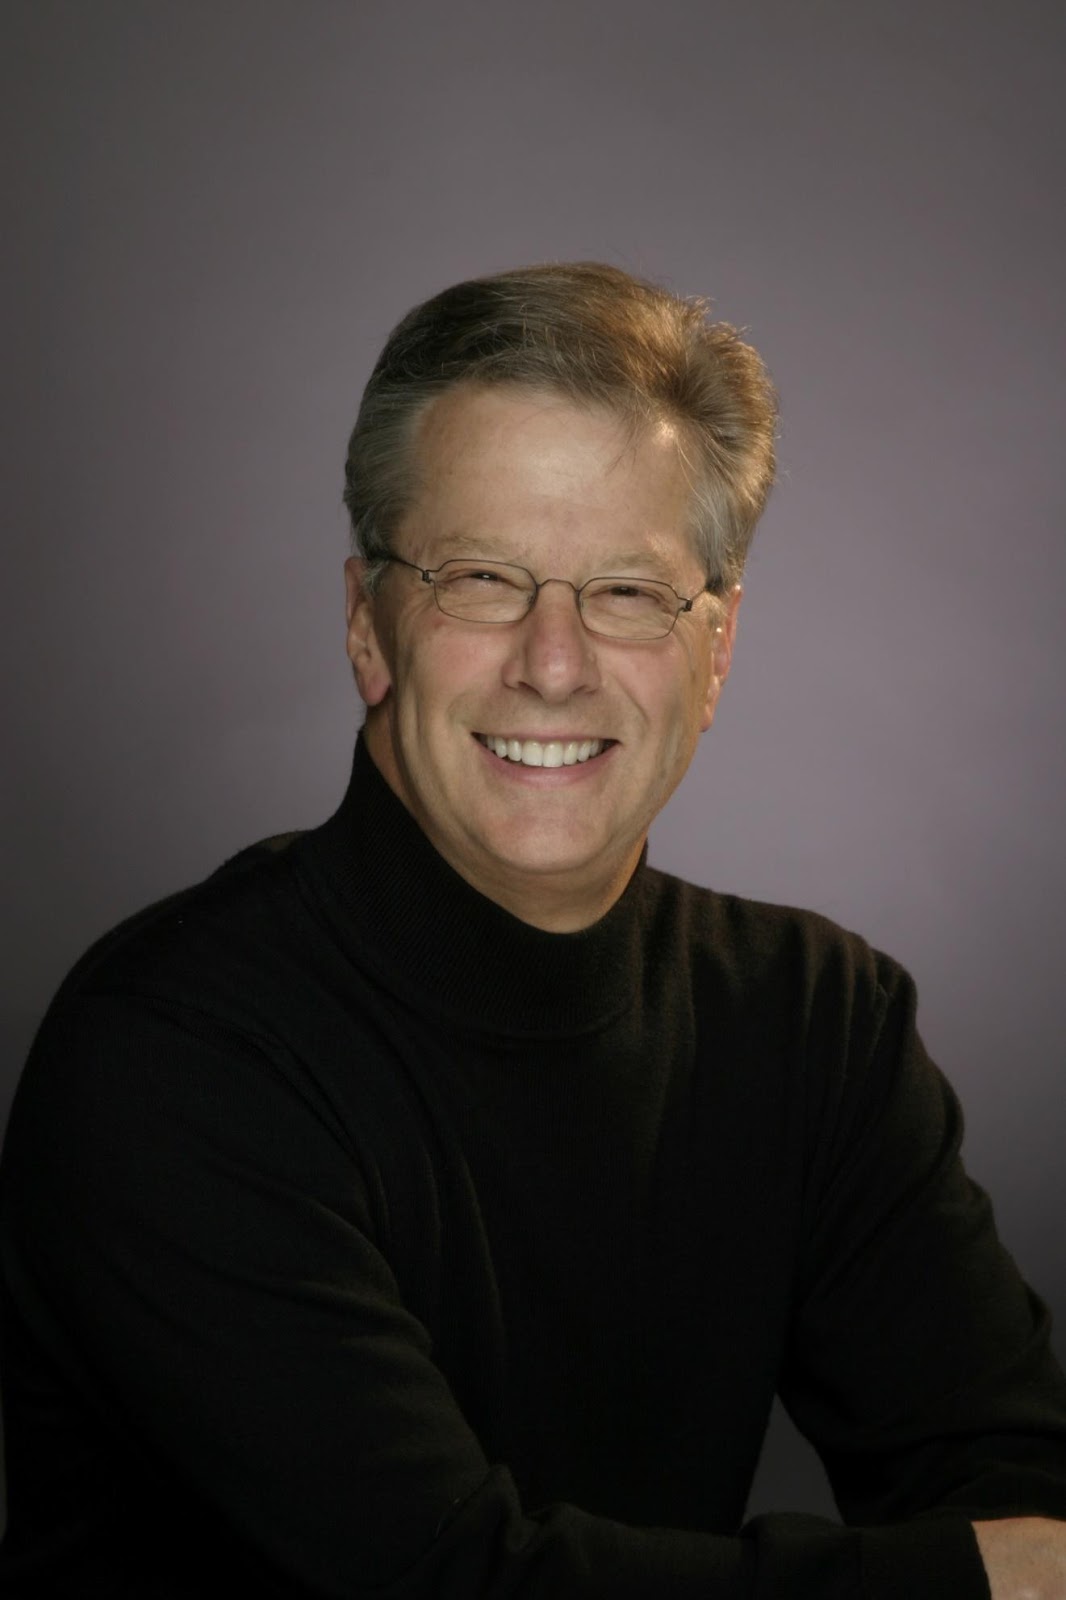 A person wearing glasses and a black turtleneck

Description automatically generated